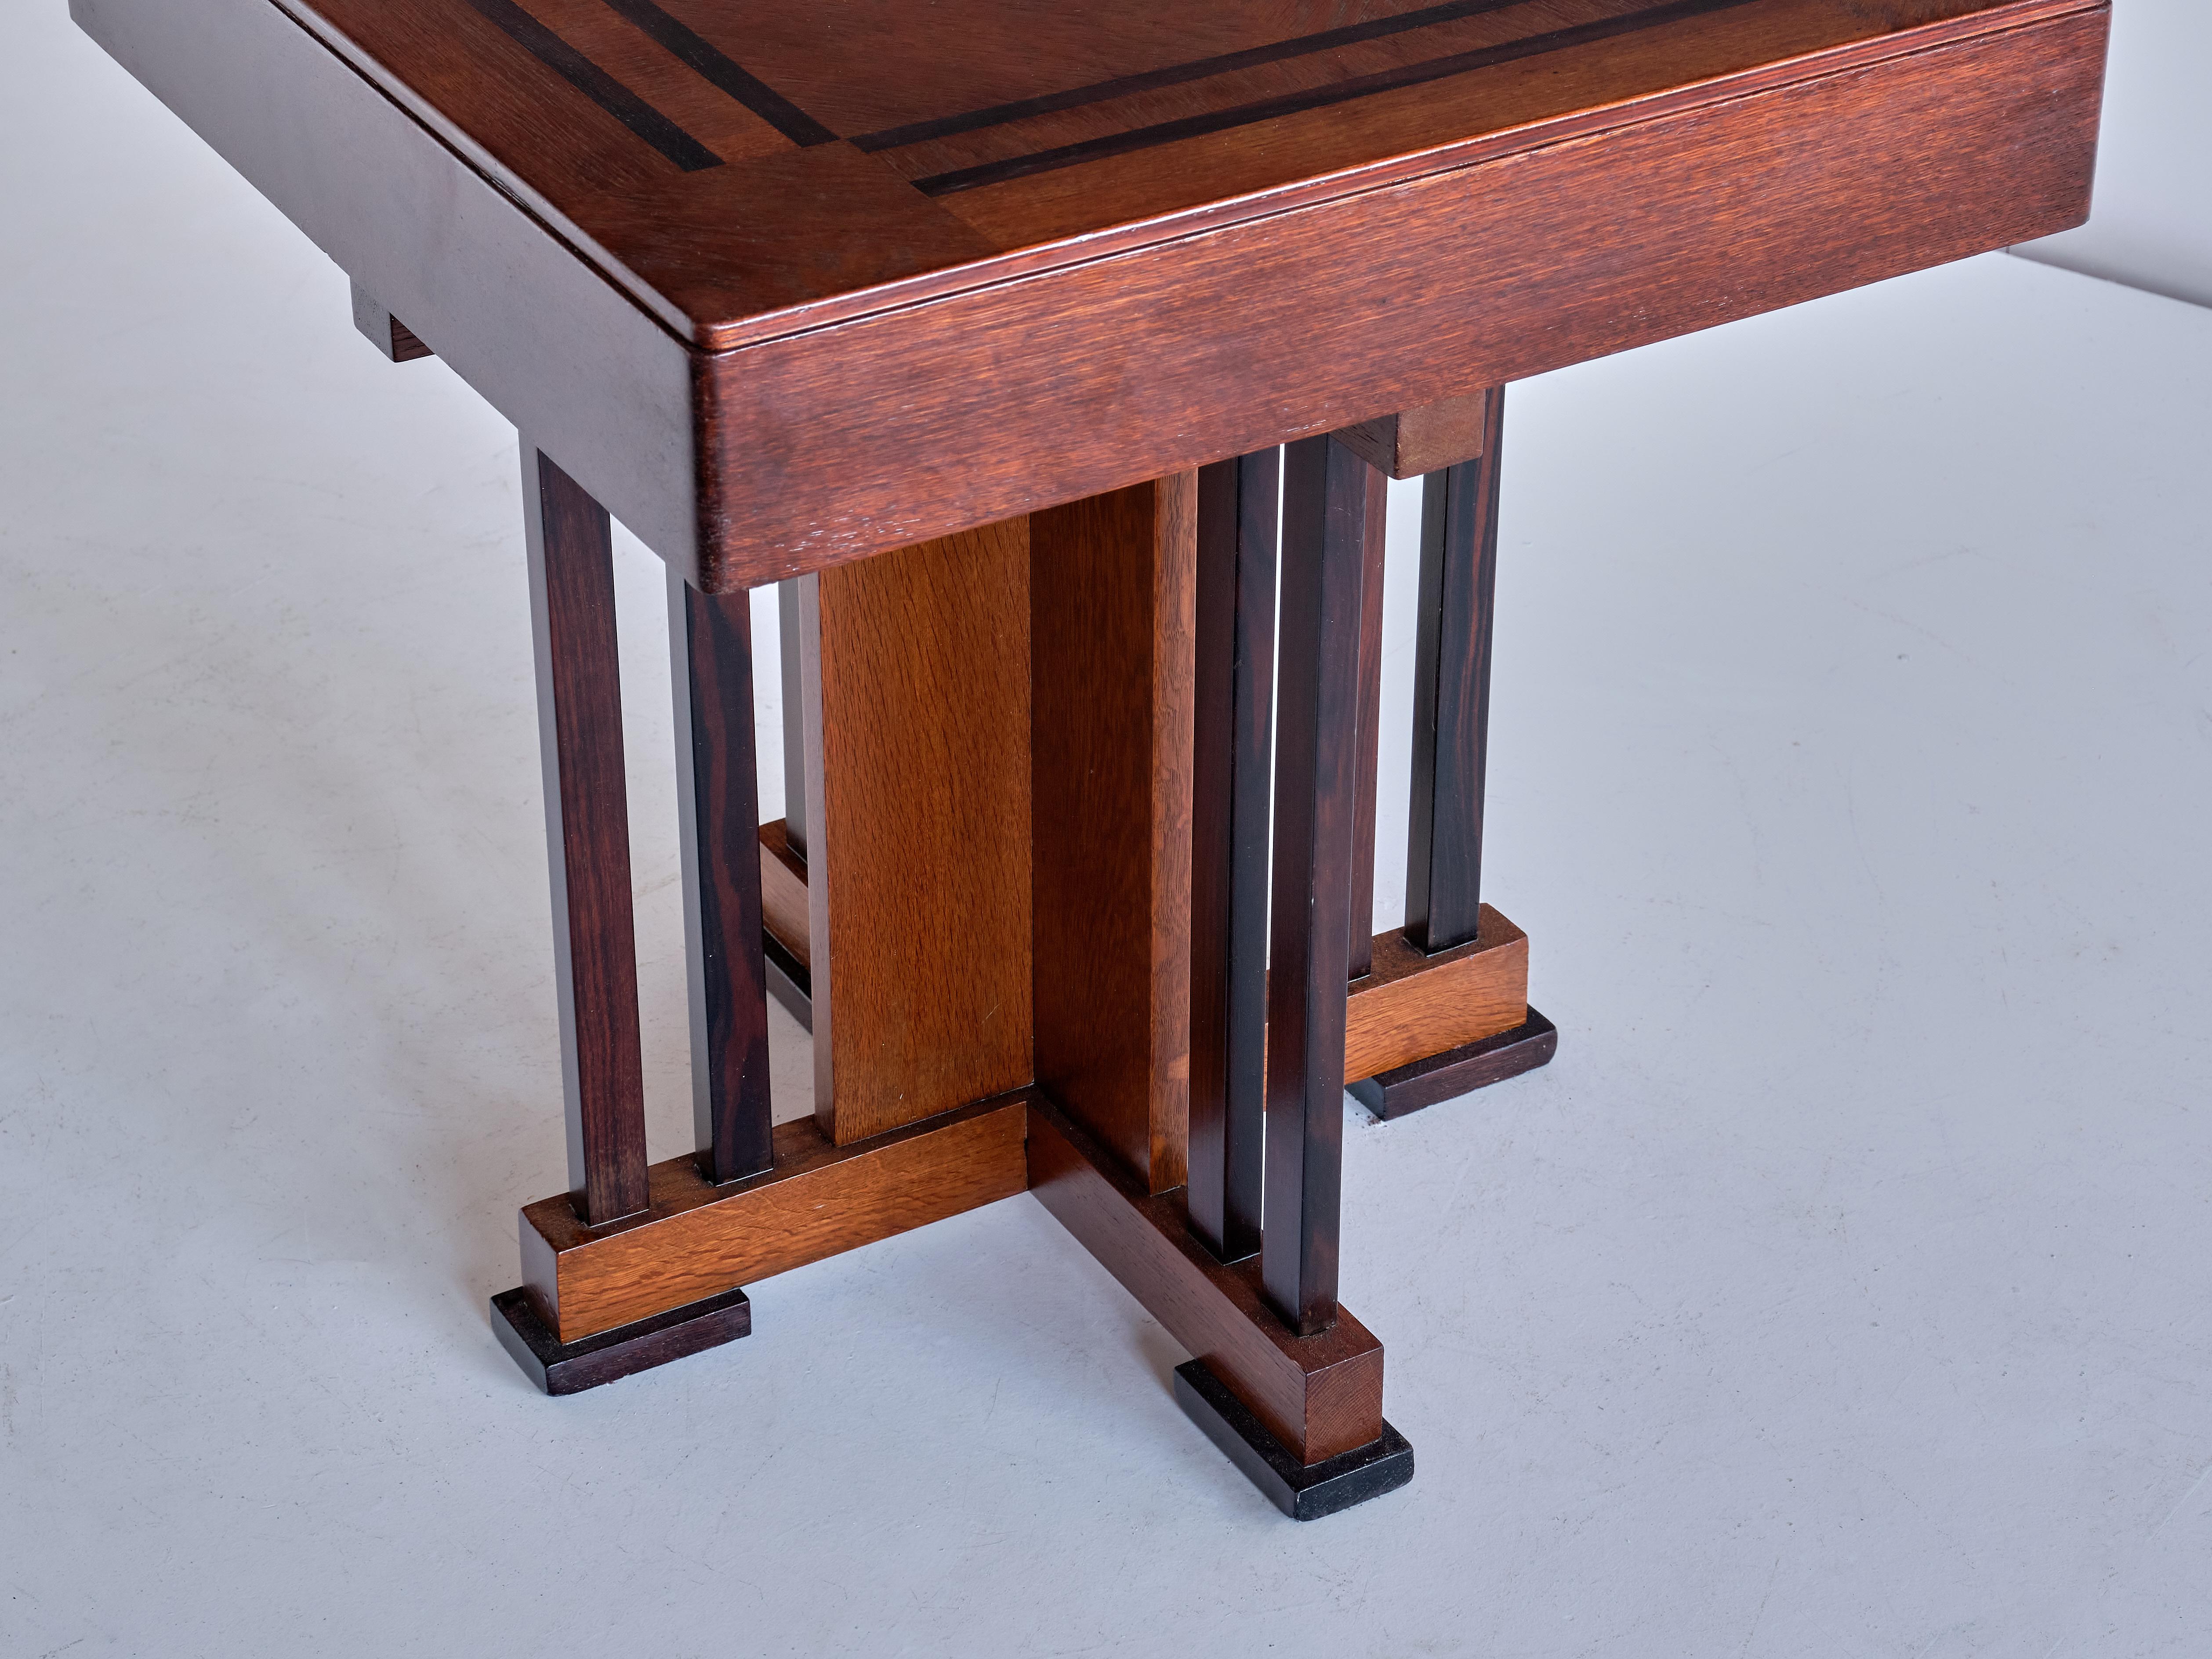 P.E.L. Izeren Side Table in Oak and Macassar Ebony, Netherlands, 1930s For Sale 2